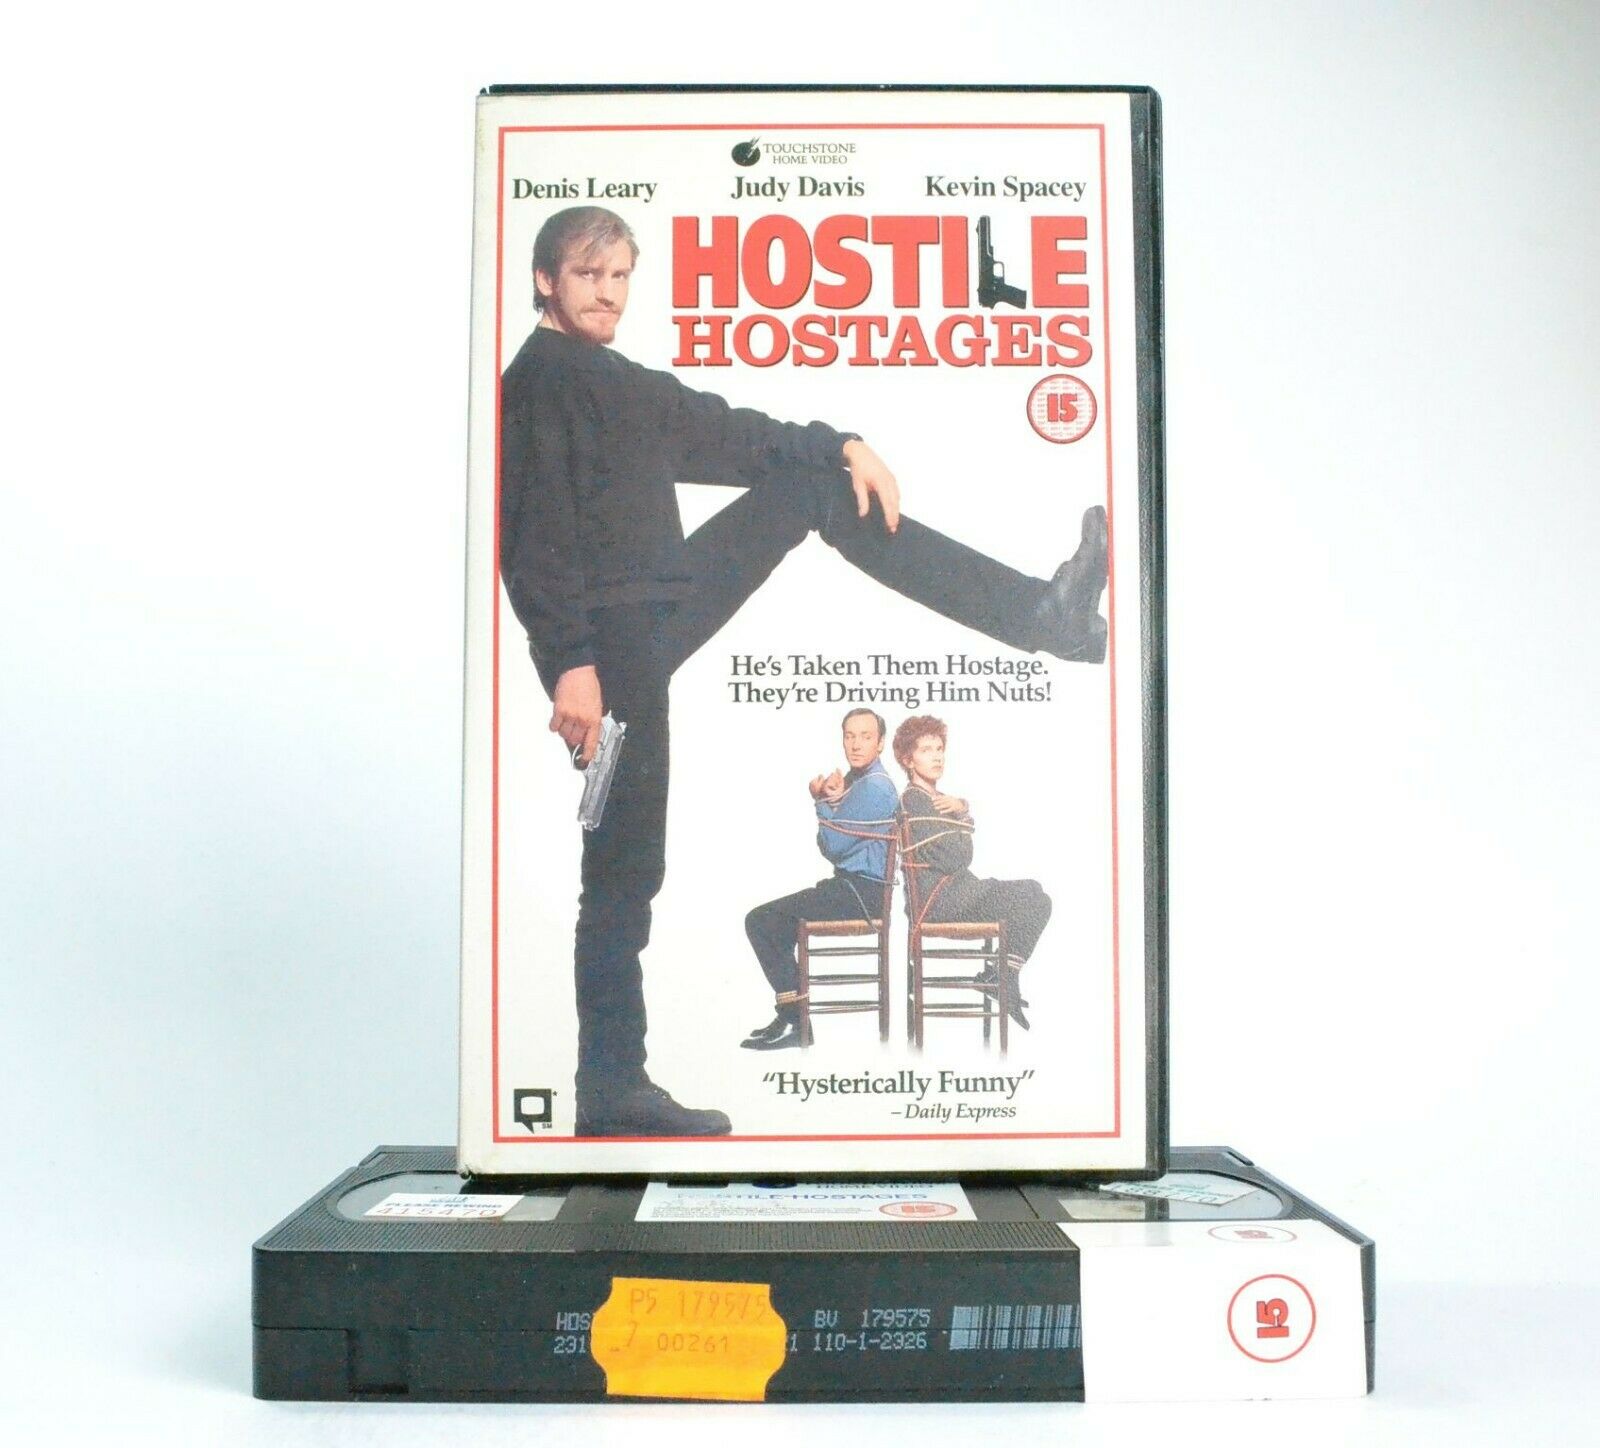 Hostile Hostages: Film By T.Demme - Black Comedy - Large Box - D.Leary - Pal VHS-